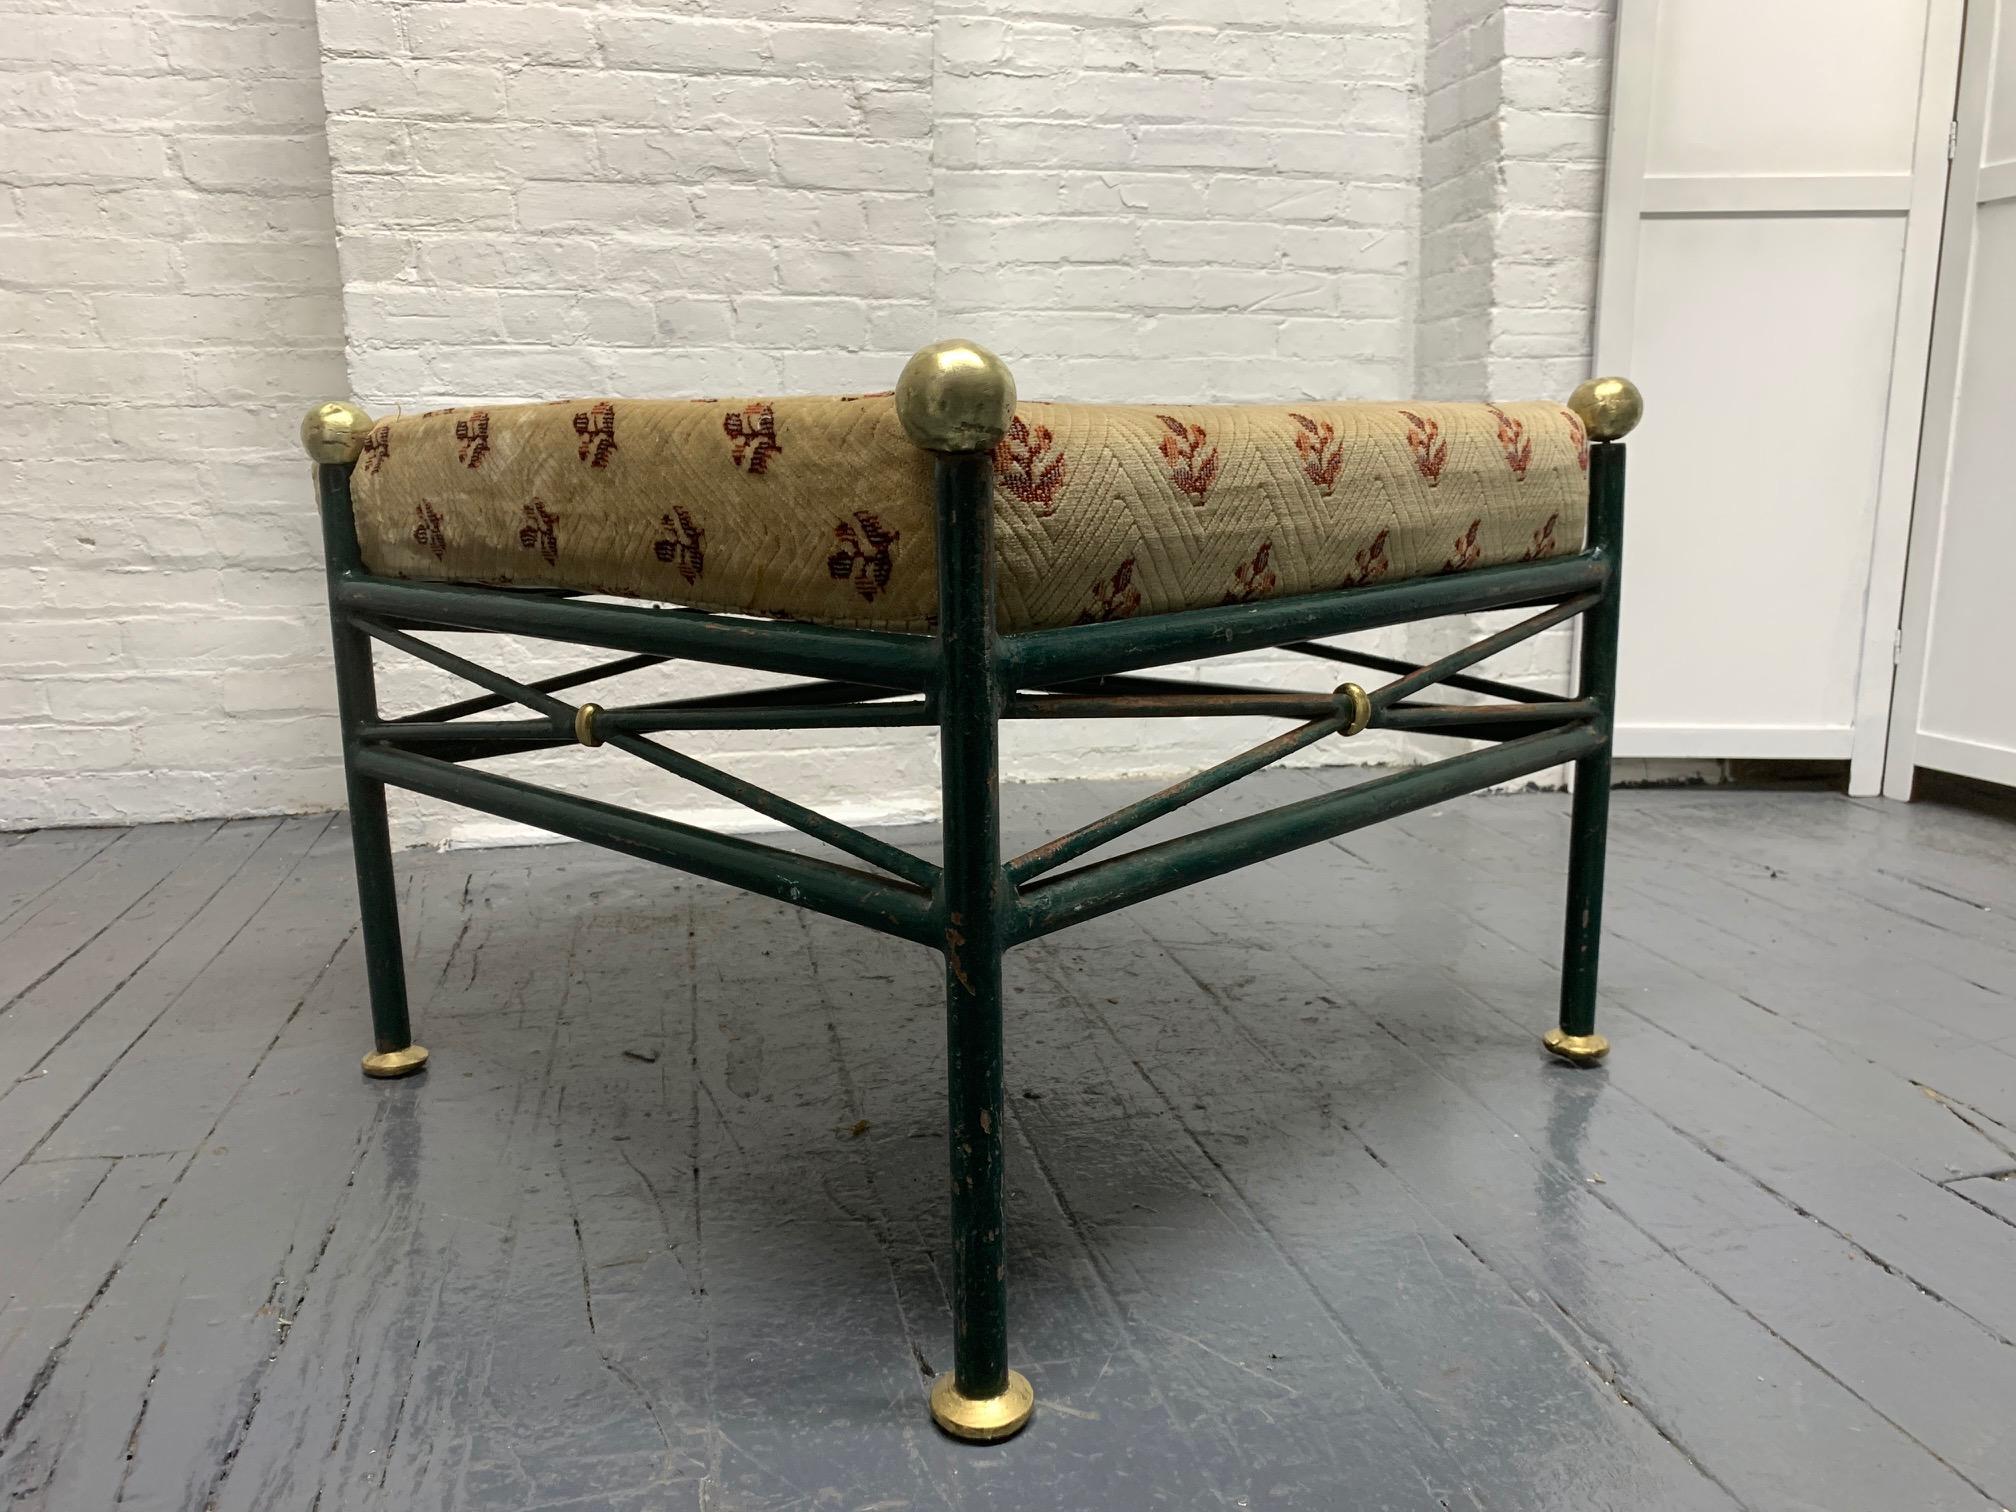 1950s French painted wrought iron bench with brass balls to the top. Style of Maison Jansen.
Measures: 20.5